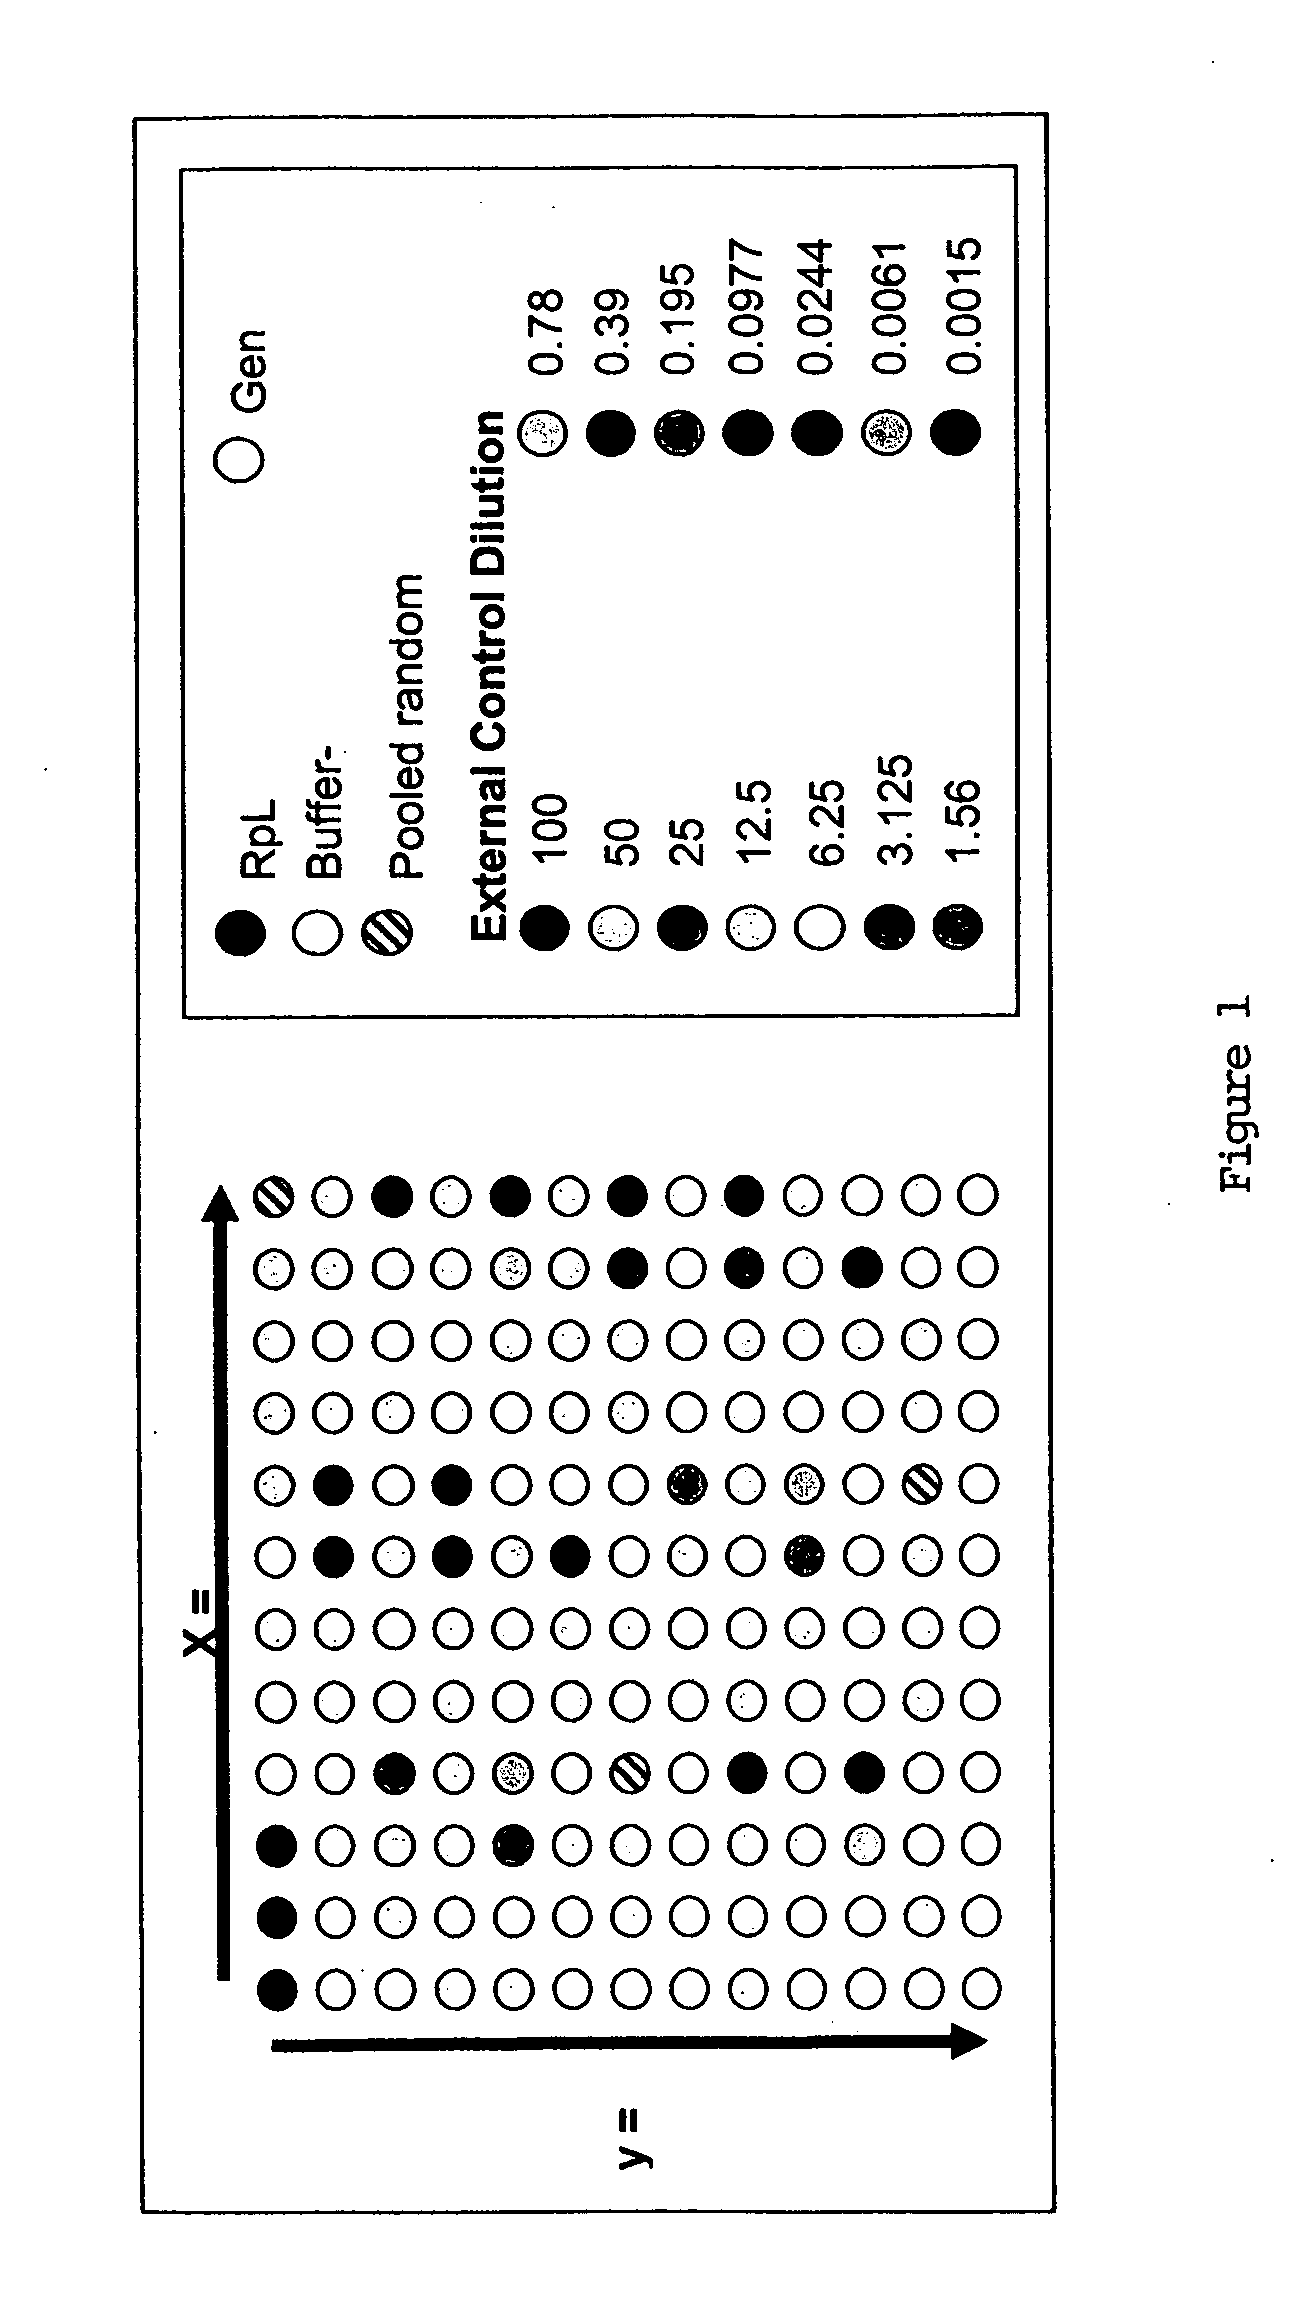 In situ dilution of external controls for use in microarrays